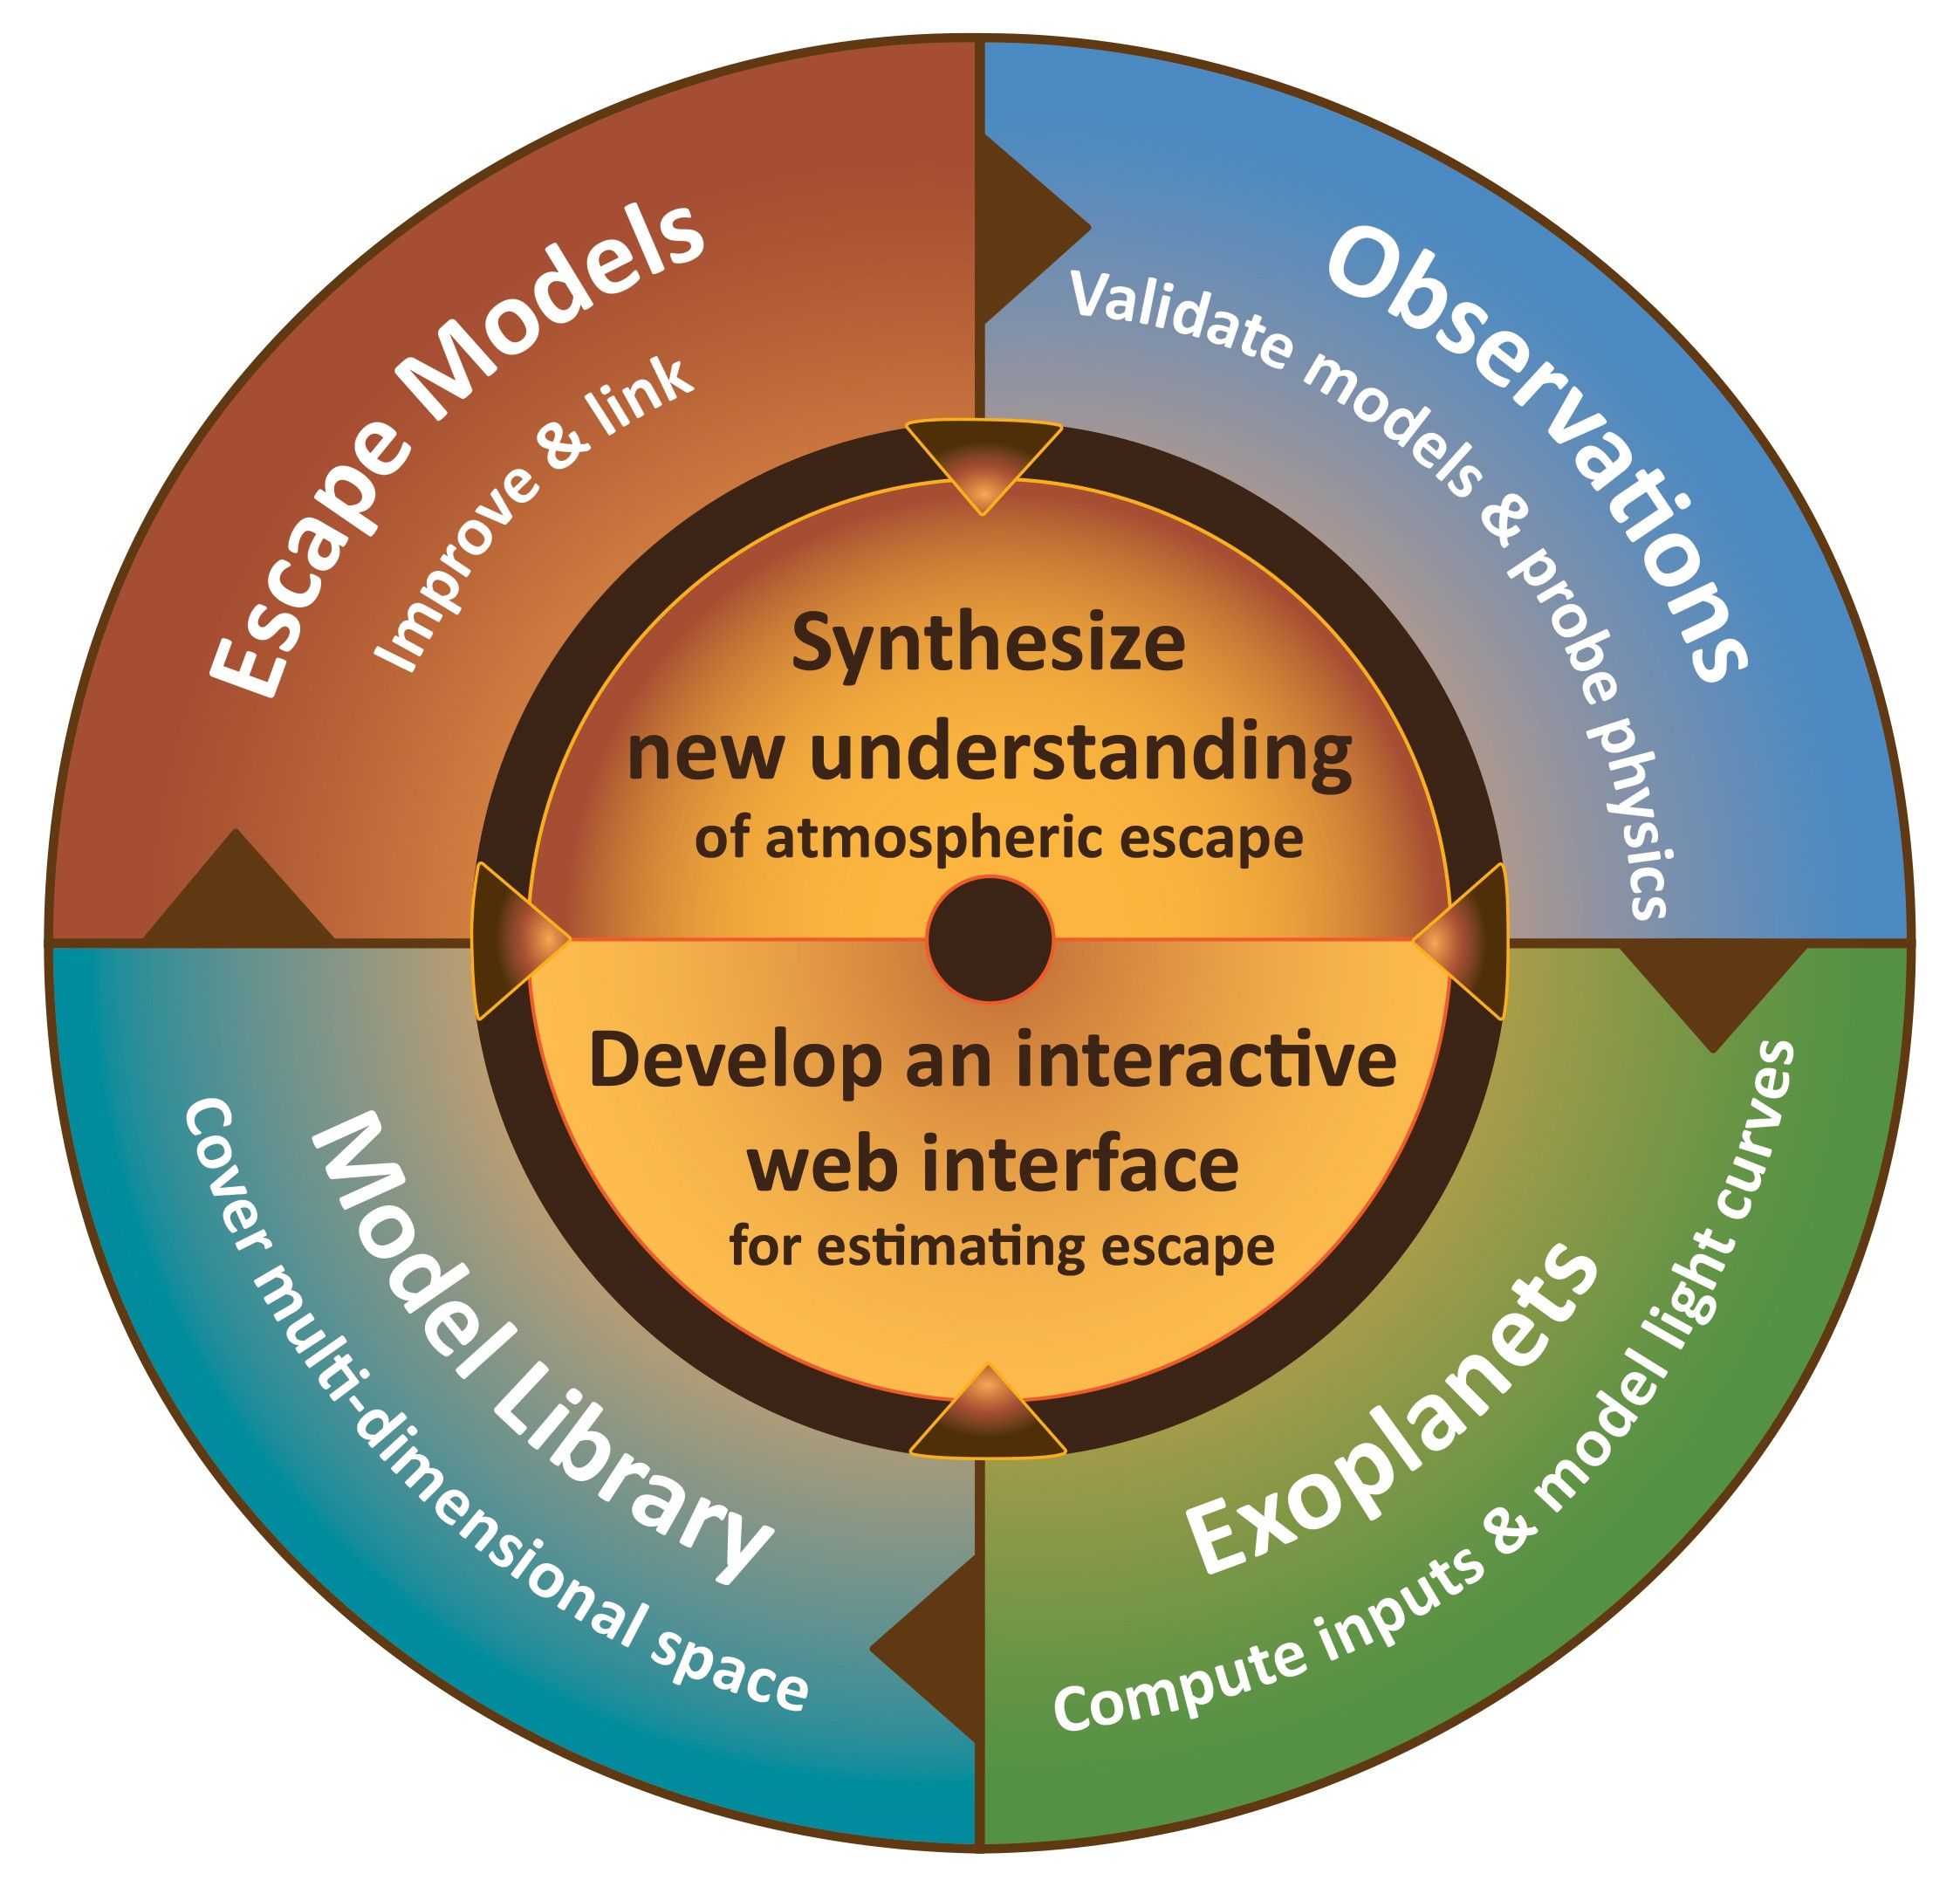 Concentric Circles with four topics in the outer circle: 1. Escape Models Improve & Link, 2. Observations Validate Models and probe physics, 3. Exoplanets Computer inputs and model light curves, 4. Model Library, Multi-dimensional space. In the inner circle are two topics: 1. Synthesize new understanding of atmospheric escape, and 2. Develop an interactive web interface for estimating escape. 